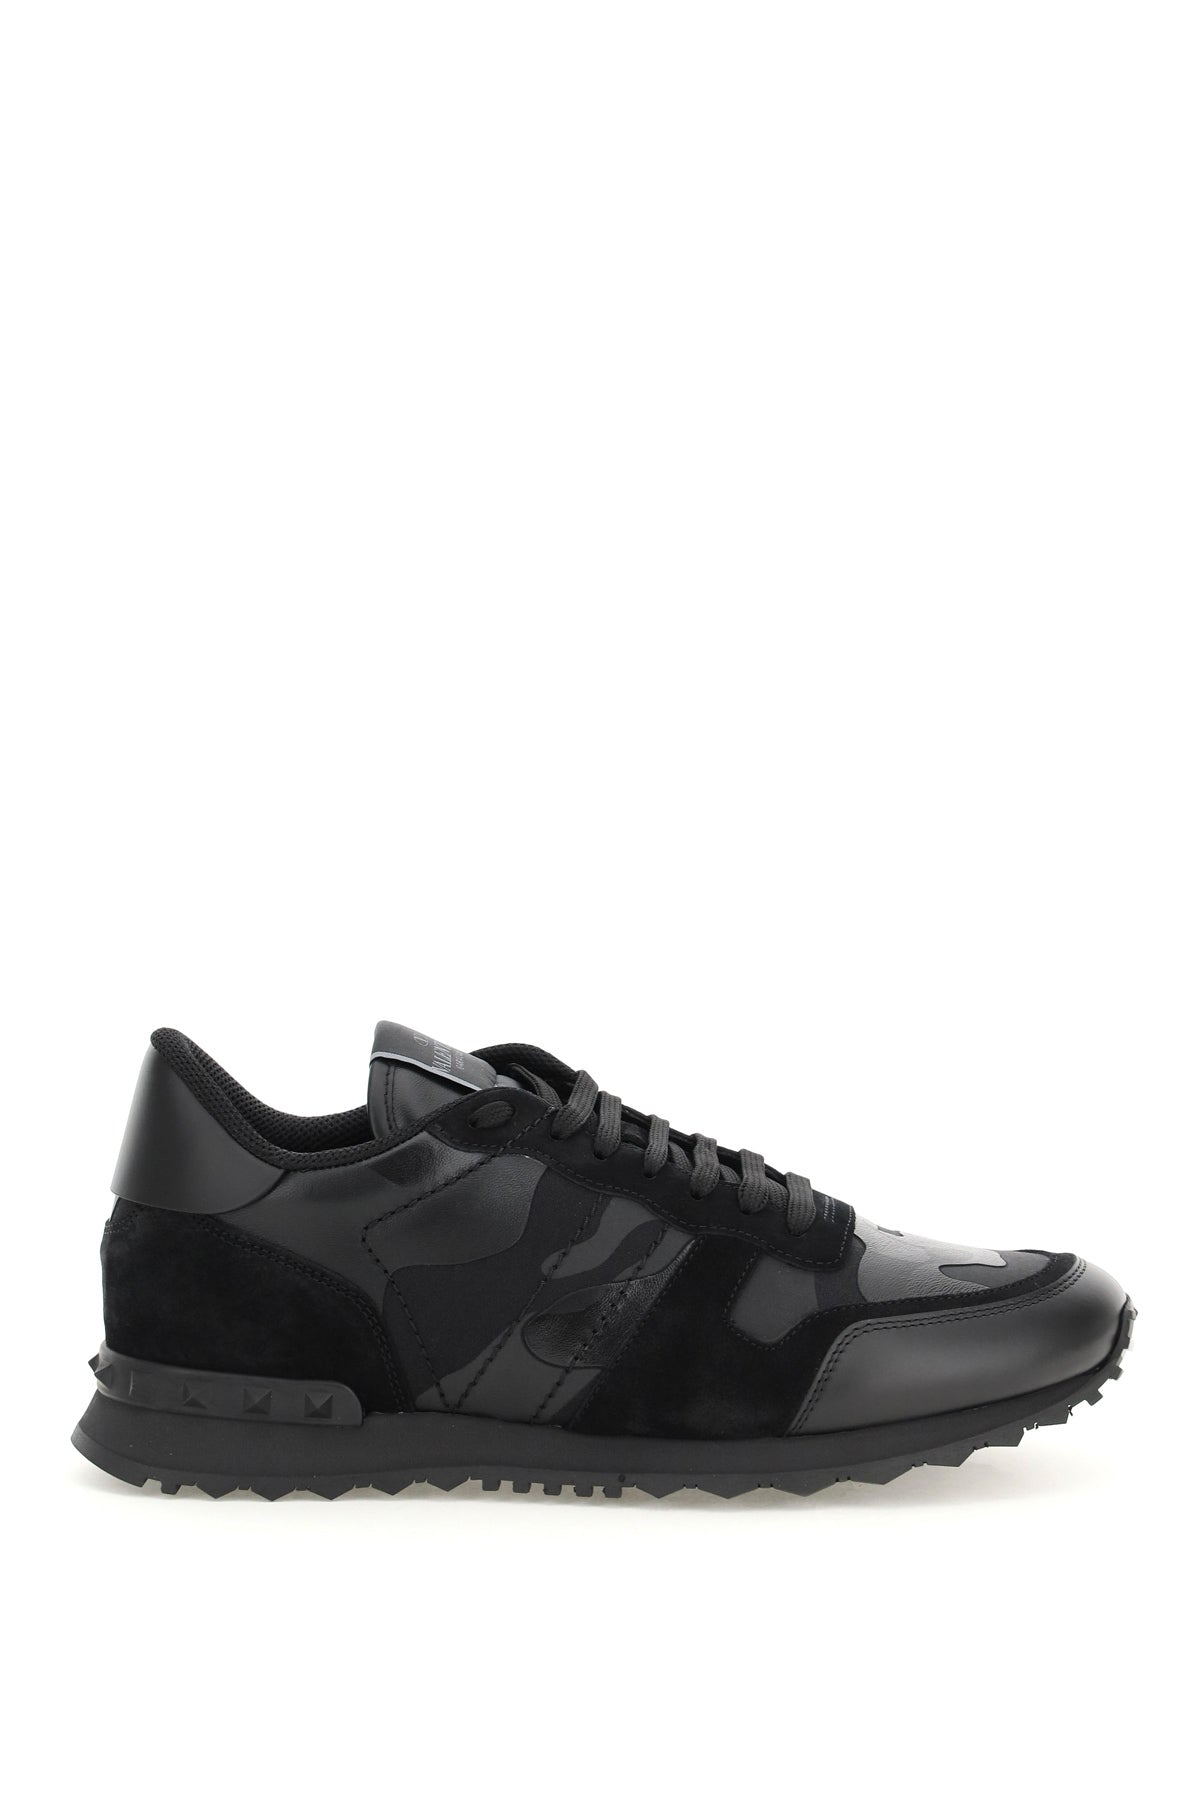 Valentino Garavani Camouflage Leather Suede Knit Sneakers With Rubber Studs In Black